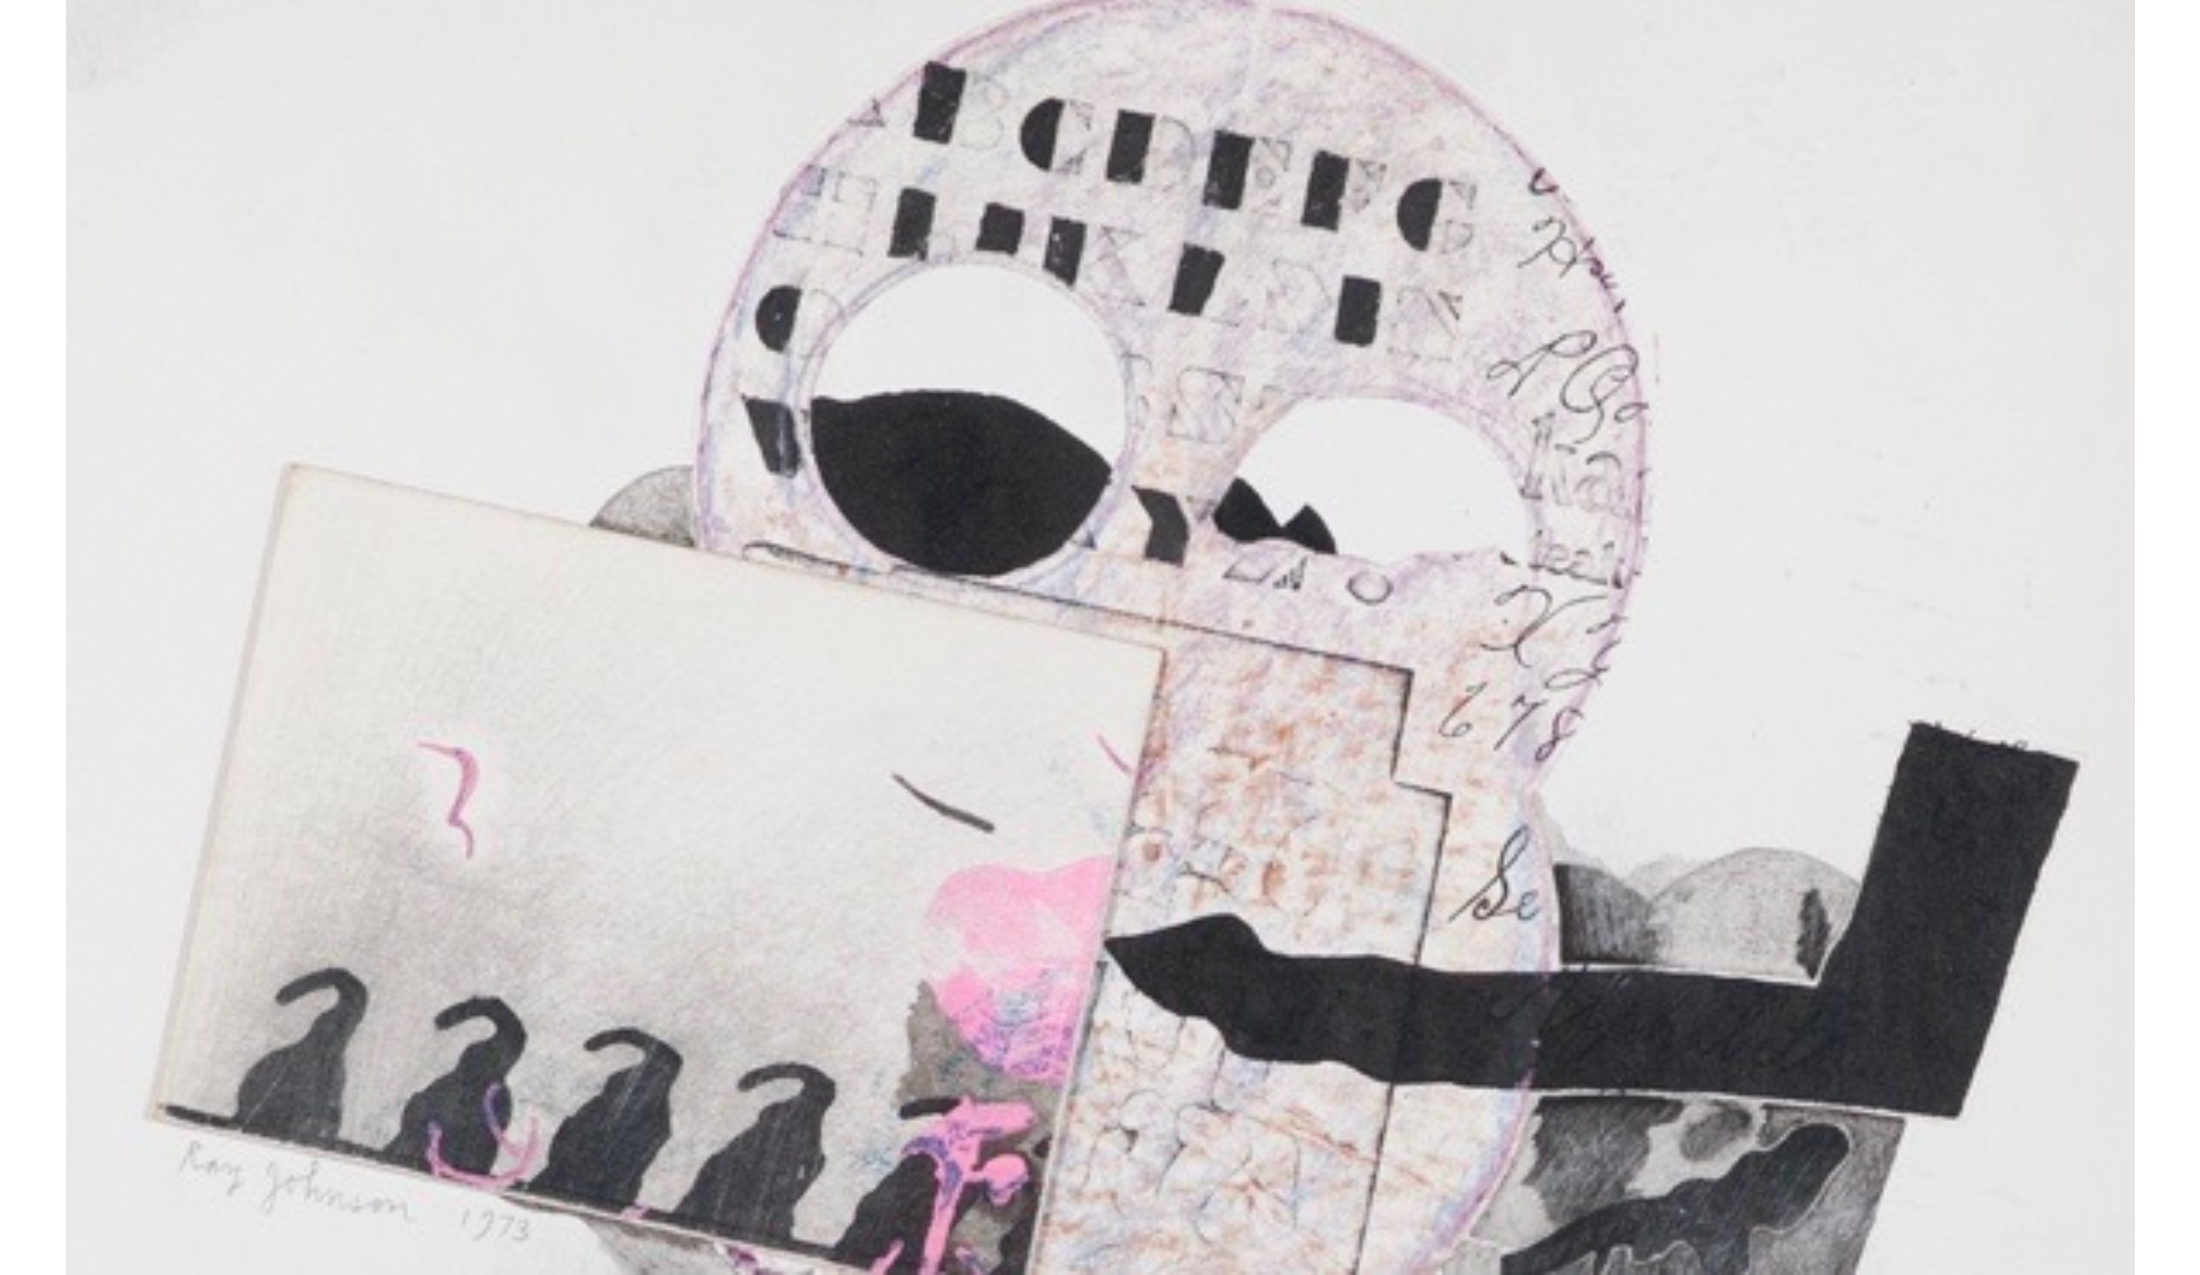 Detail of ‘The Pink Collage’: pink and gray; two overlapping rectangles in front of a circle printed with font samplers.